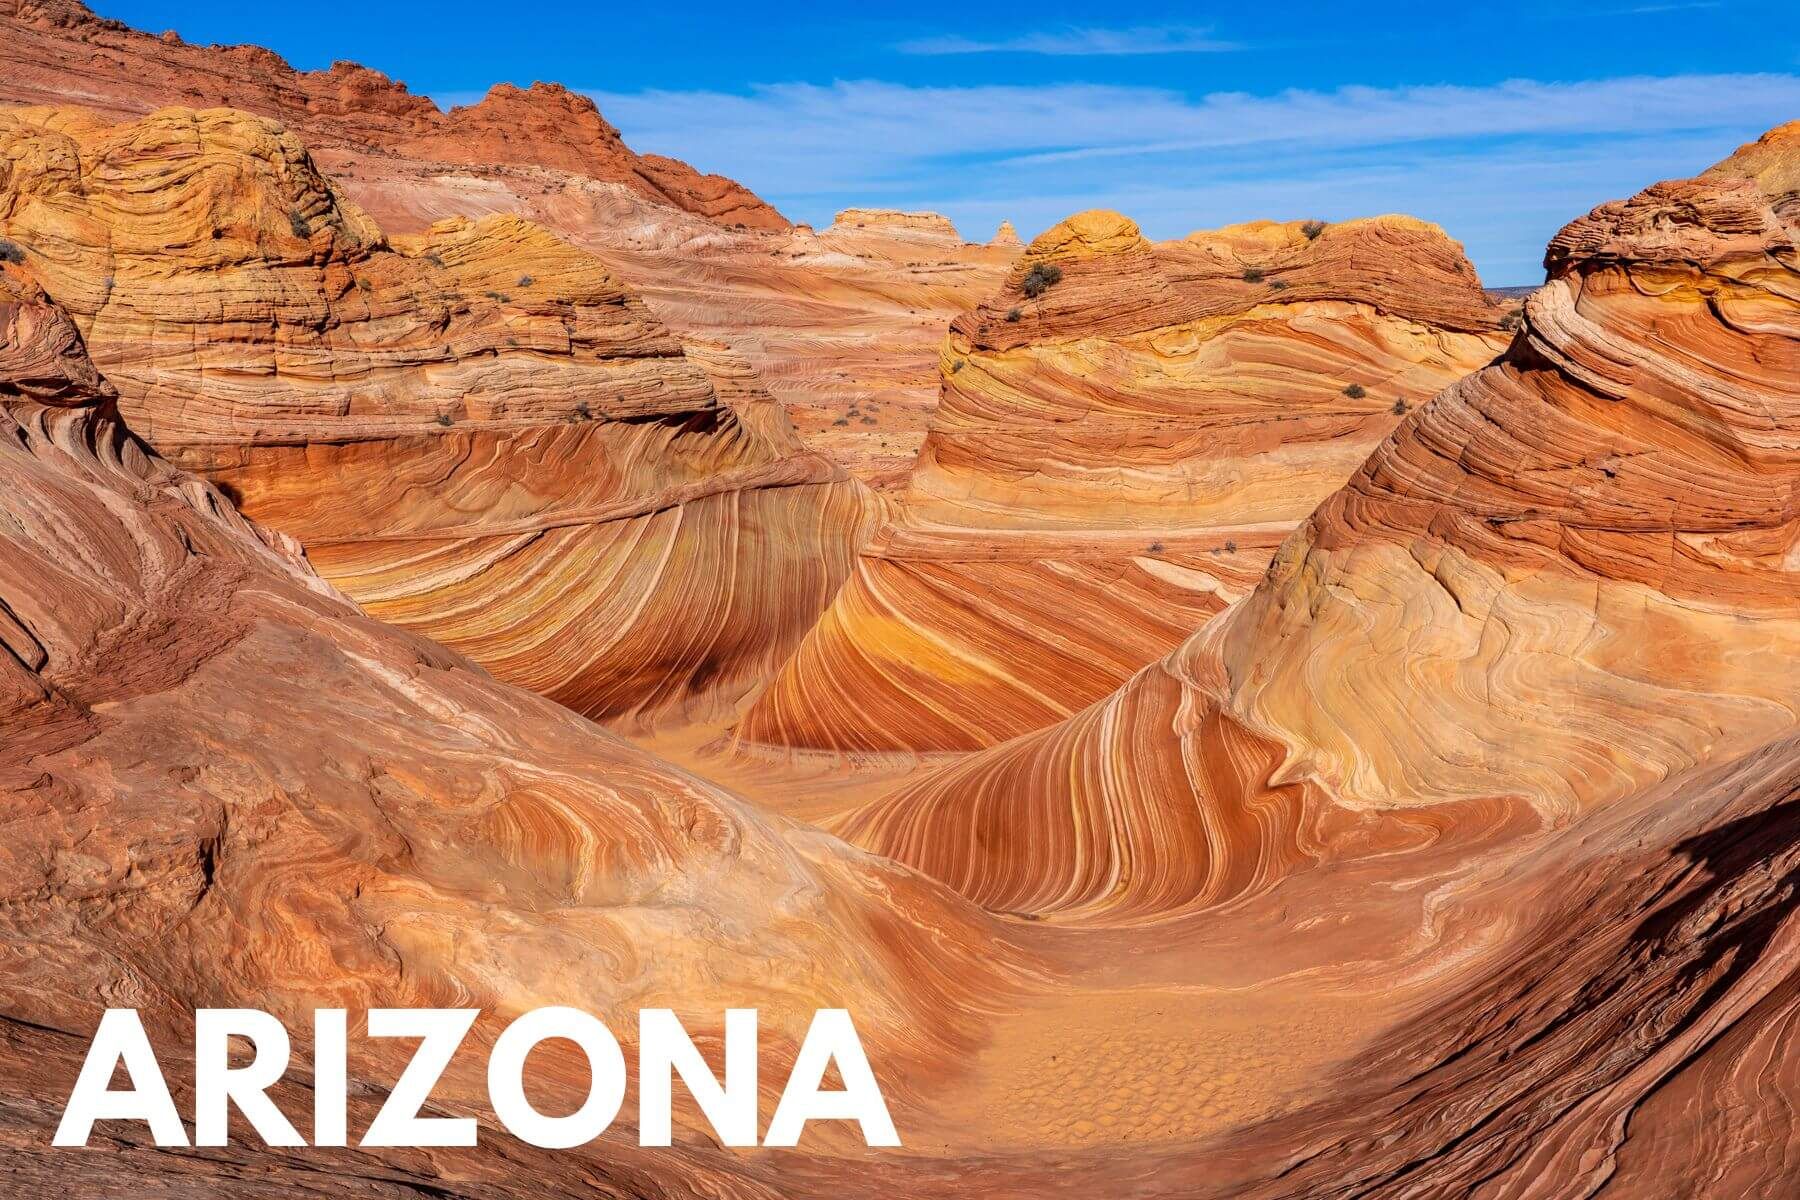 Photo of the swirling patterns and colorful natural rock formations at The Wave with the word Arizona overlaid